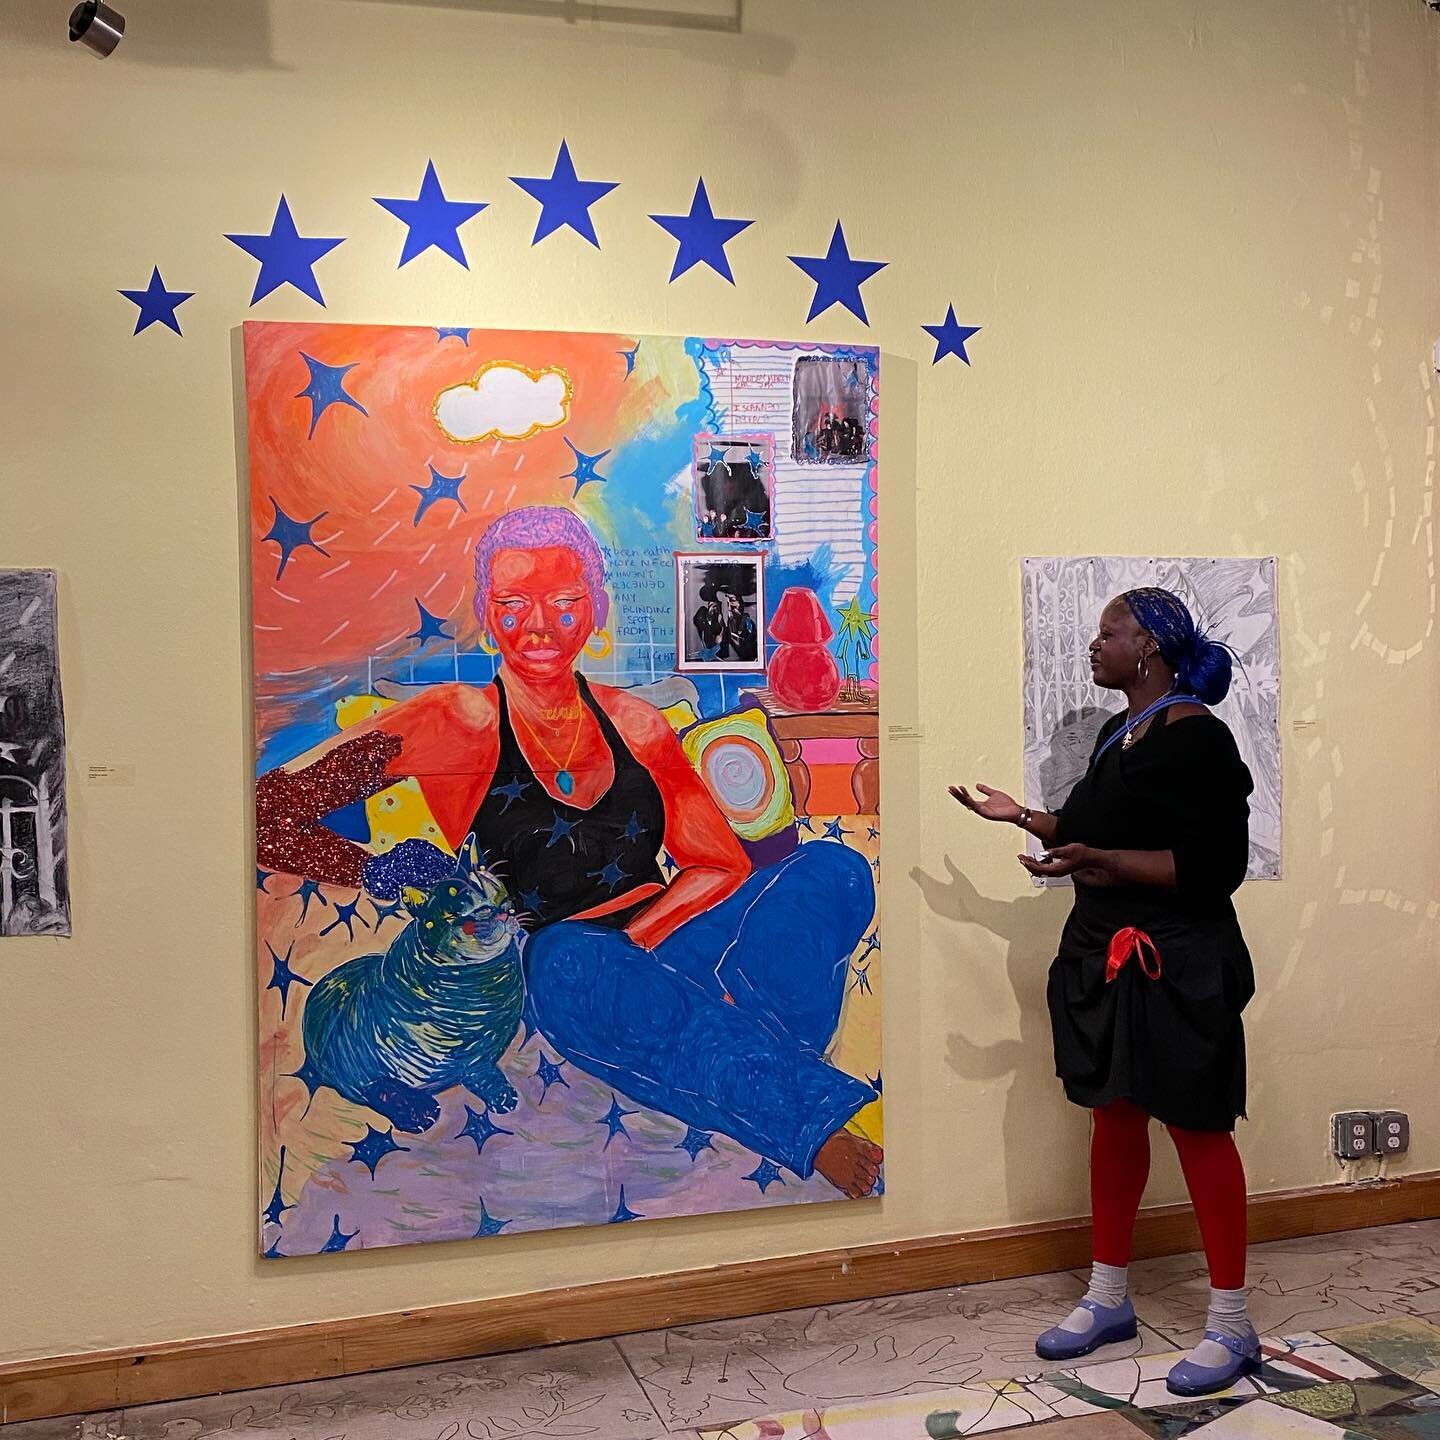 I had the honor of hearing Zeinab Diomande speak about the evolution of her practice, the intention behind the vibrant colors and tactile materials she uses, and how she gives her &quot;alter-egos&quot; freedom in her work. If you're Philly-based or 